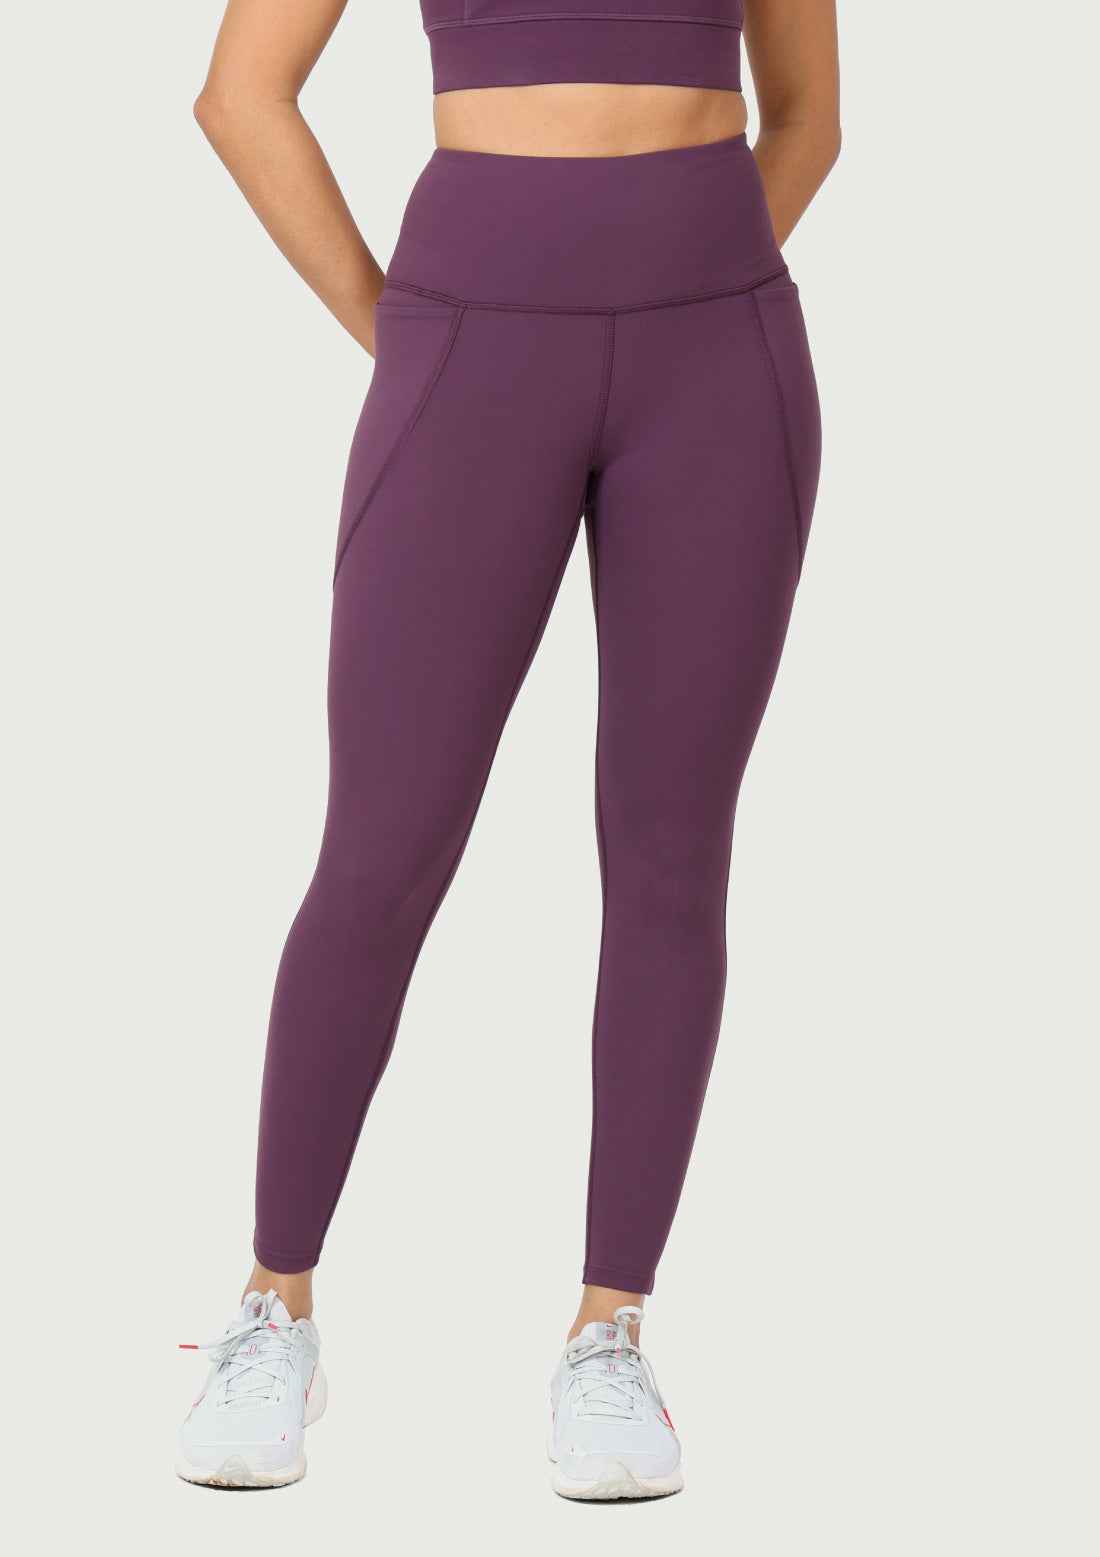 Buy Bliss Club Women Lavender Groove-In Cotton Flare Pants Tall